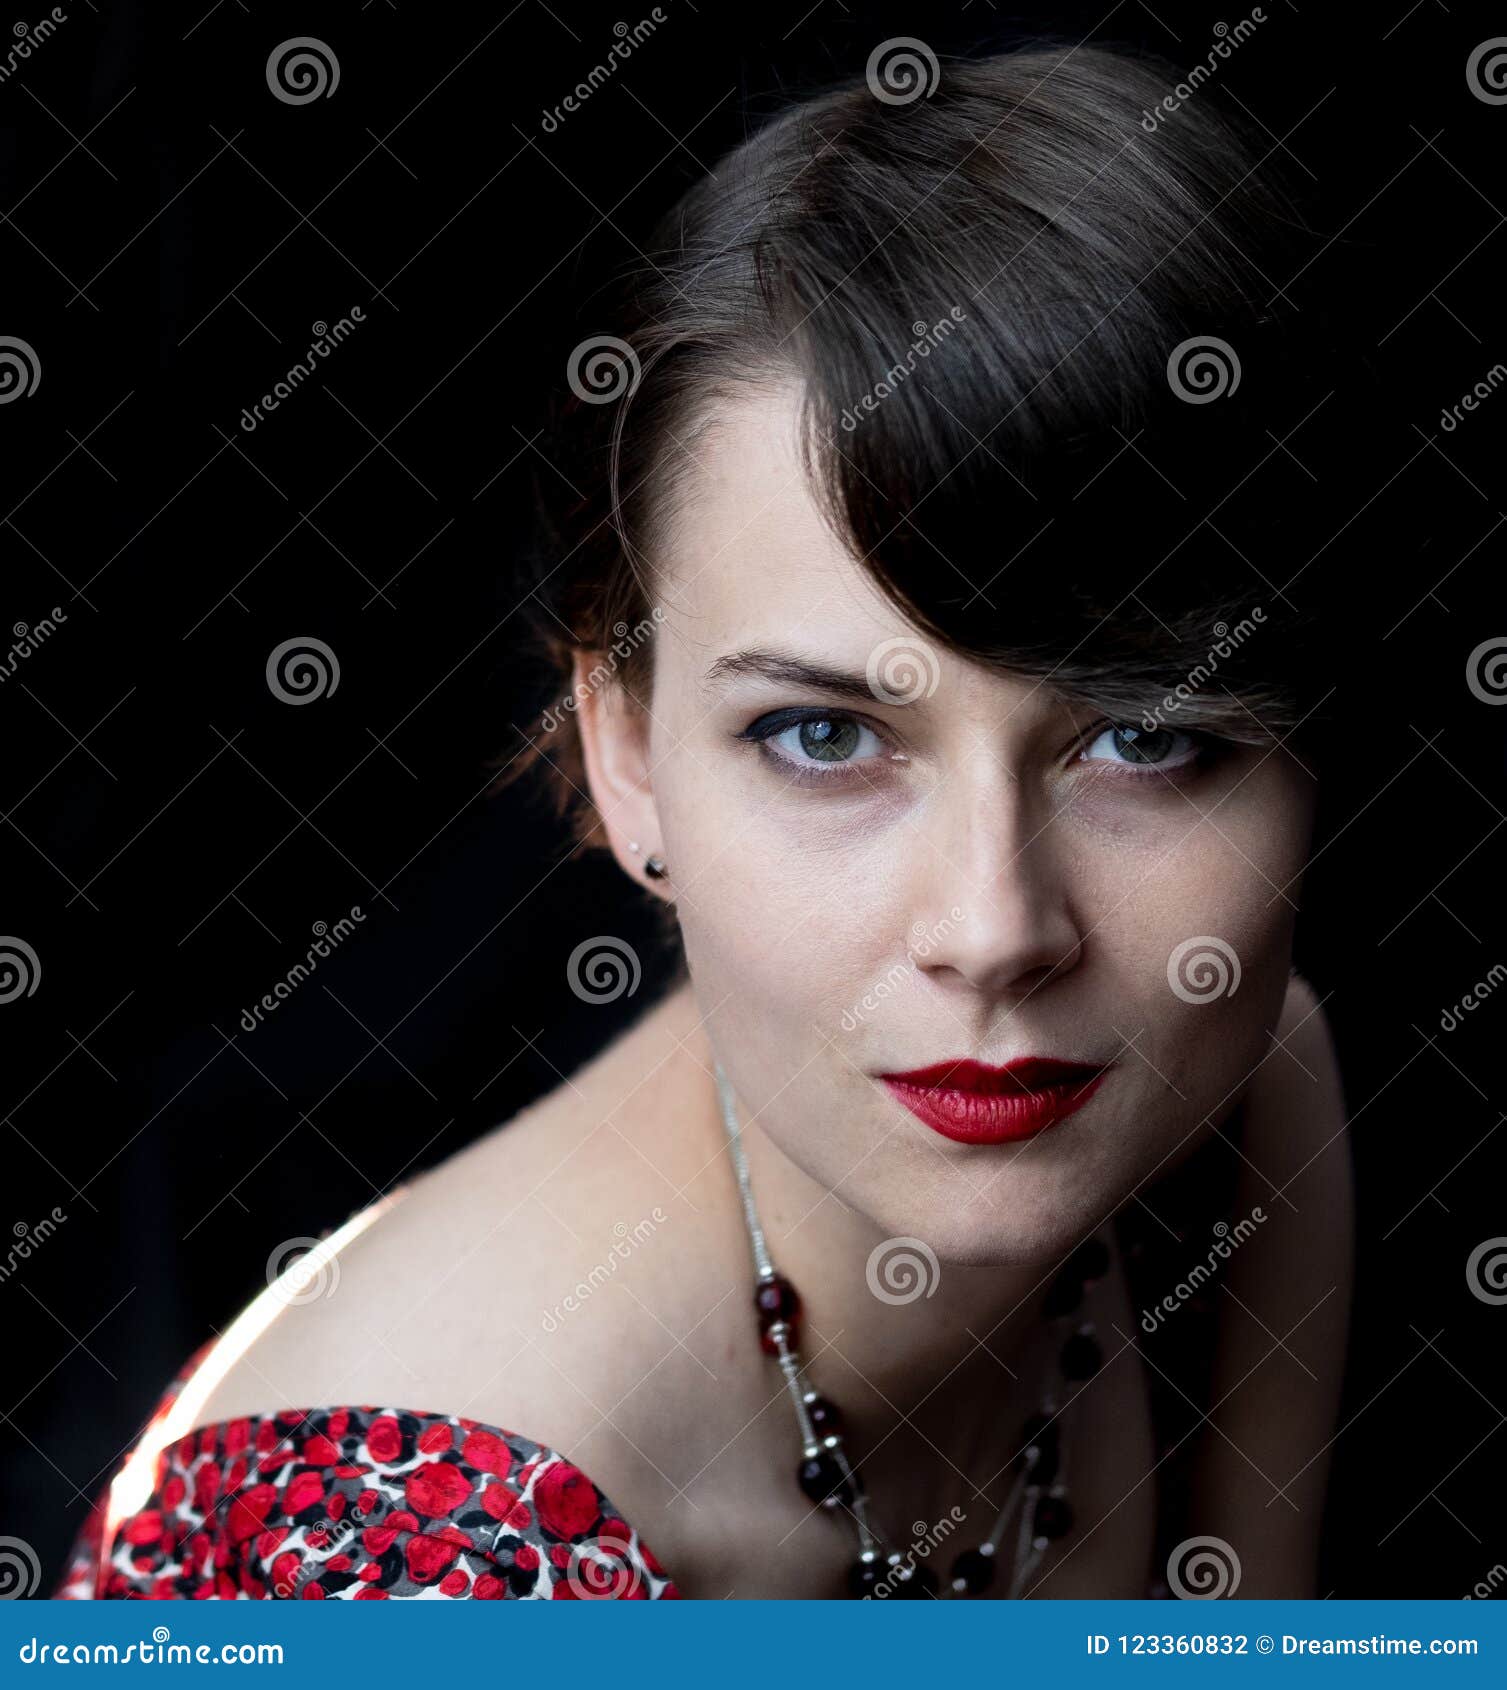 confident portrait of a young woman in red